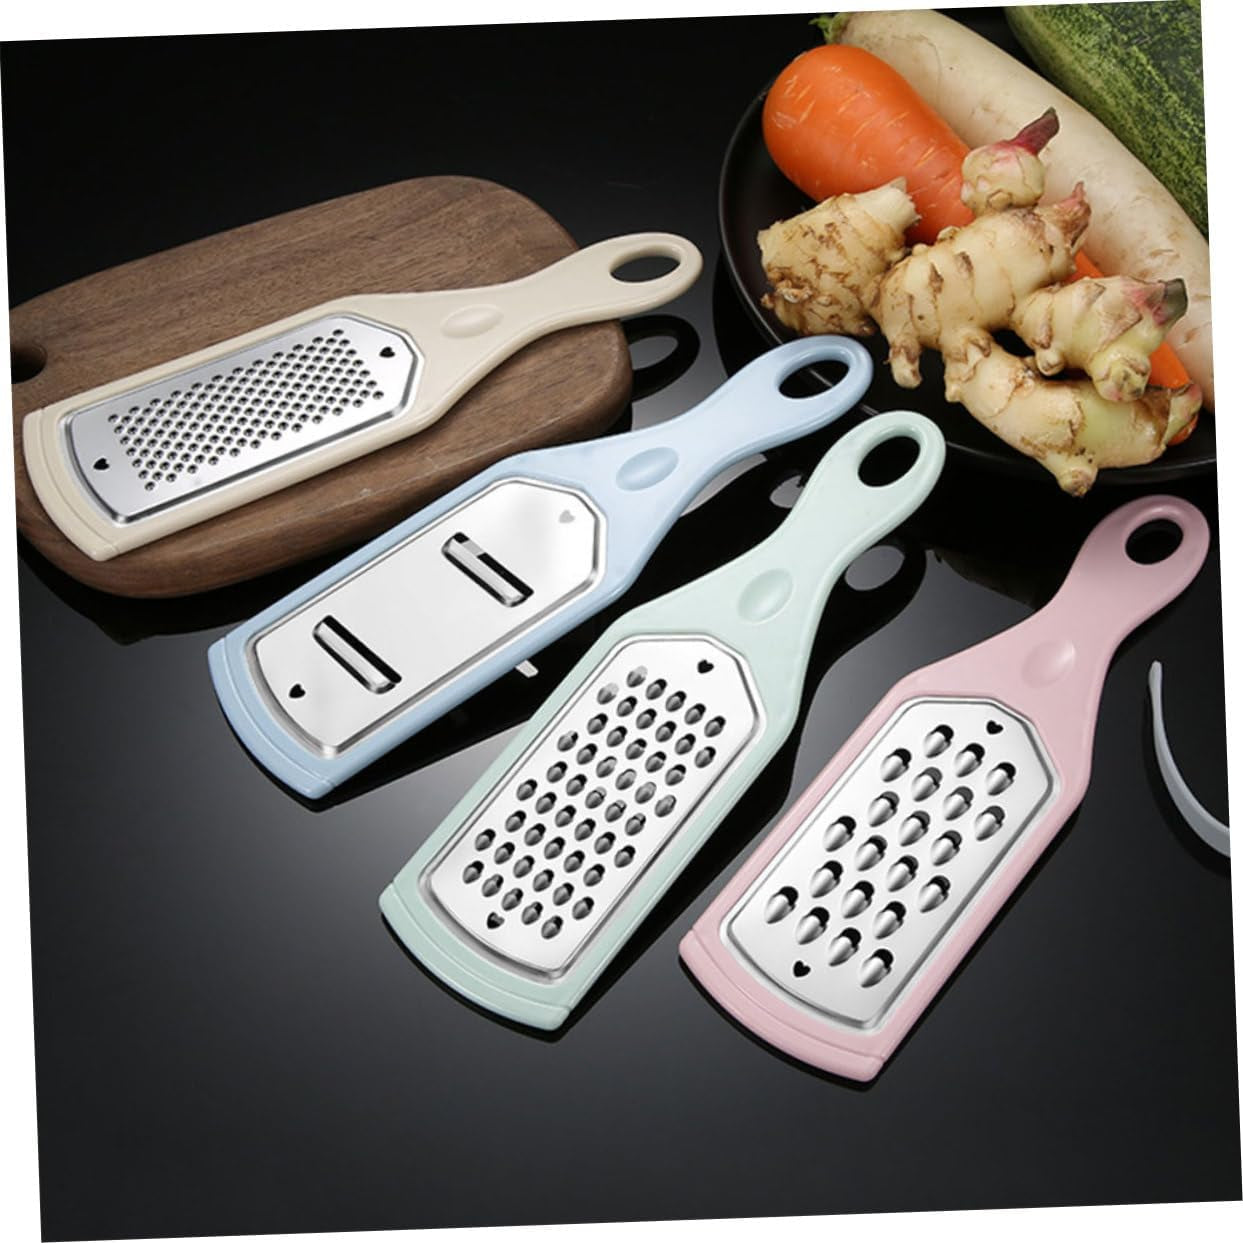 4Pcs Stainless Steel Grater Household Gadgets Potatoes Slicer Rotary Tool Stainless Steel Vegetable Slicer Onion Slicer Garlic Grater Potatoe Slicer Lemon Food Manual Pp  TIDTALEO   